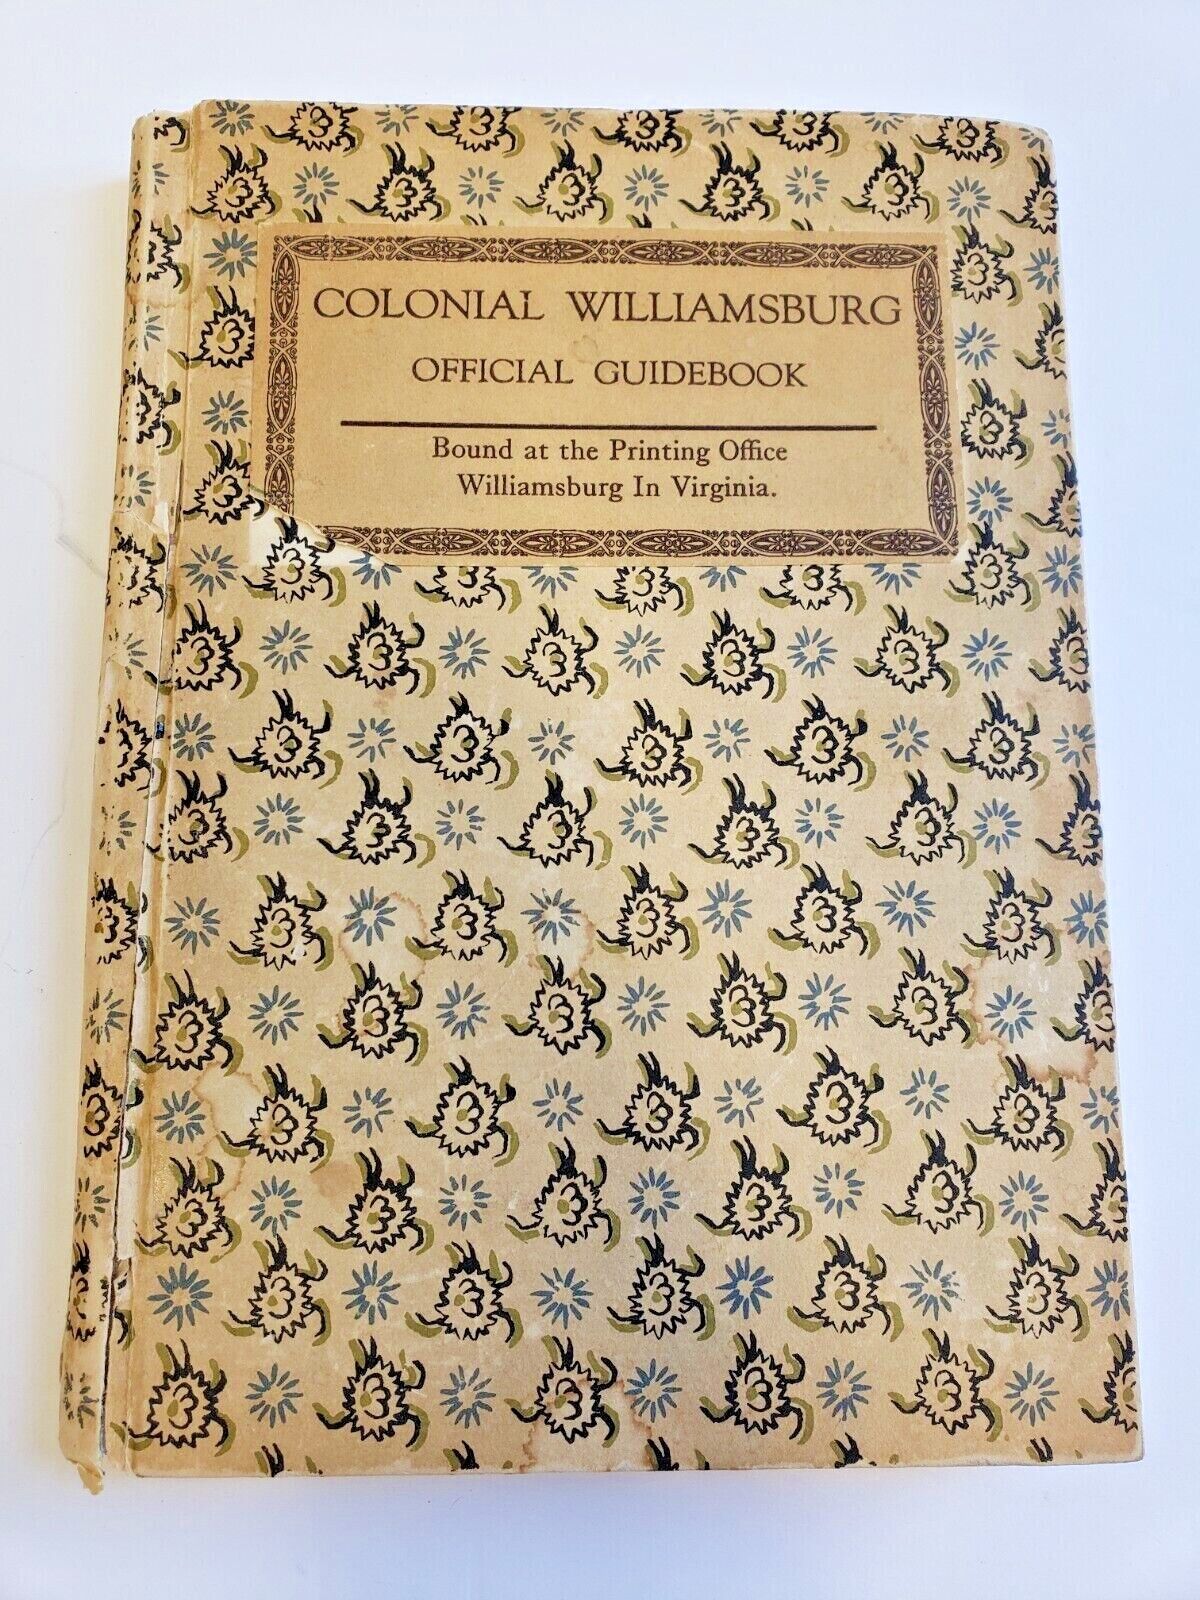 COLONIAL WILLIAMSBURG OFFICIAL GUIDEBOOK 1964